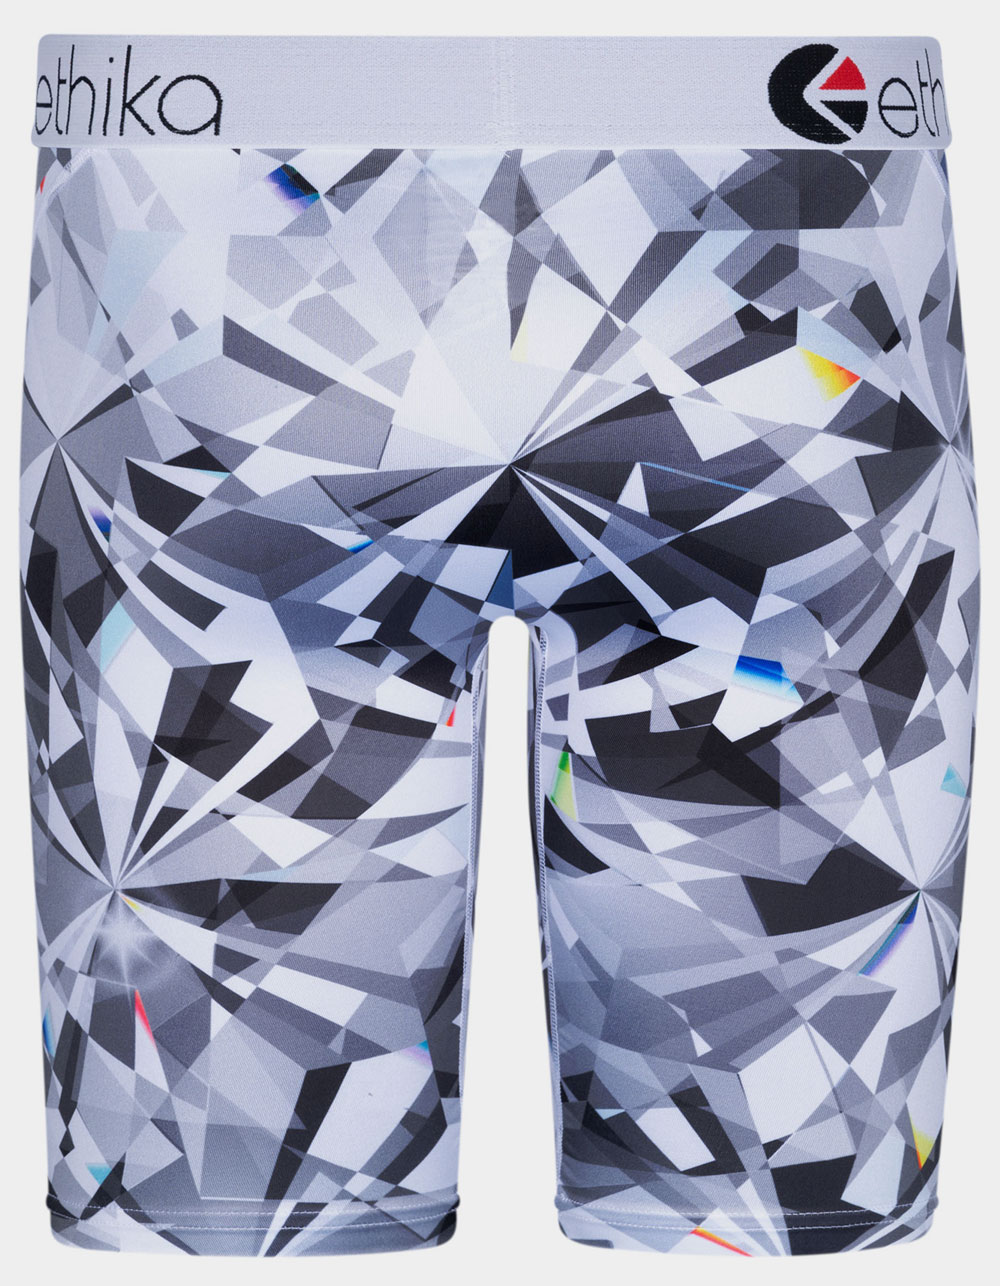 Ethika Compression Shorts Men's White New with Tags M - Locker